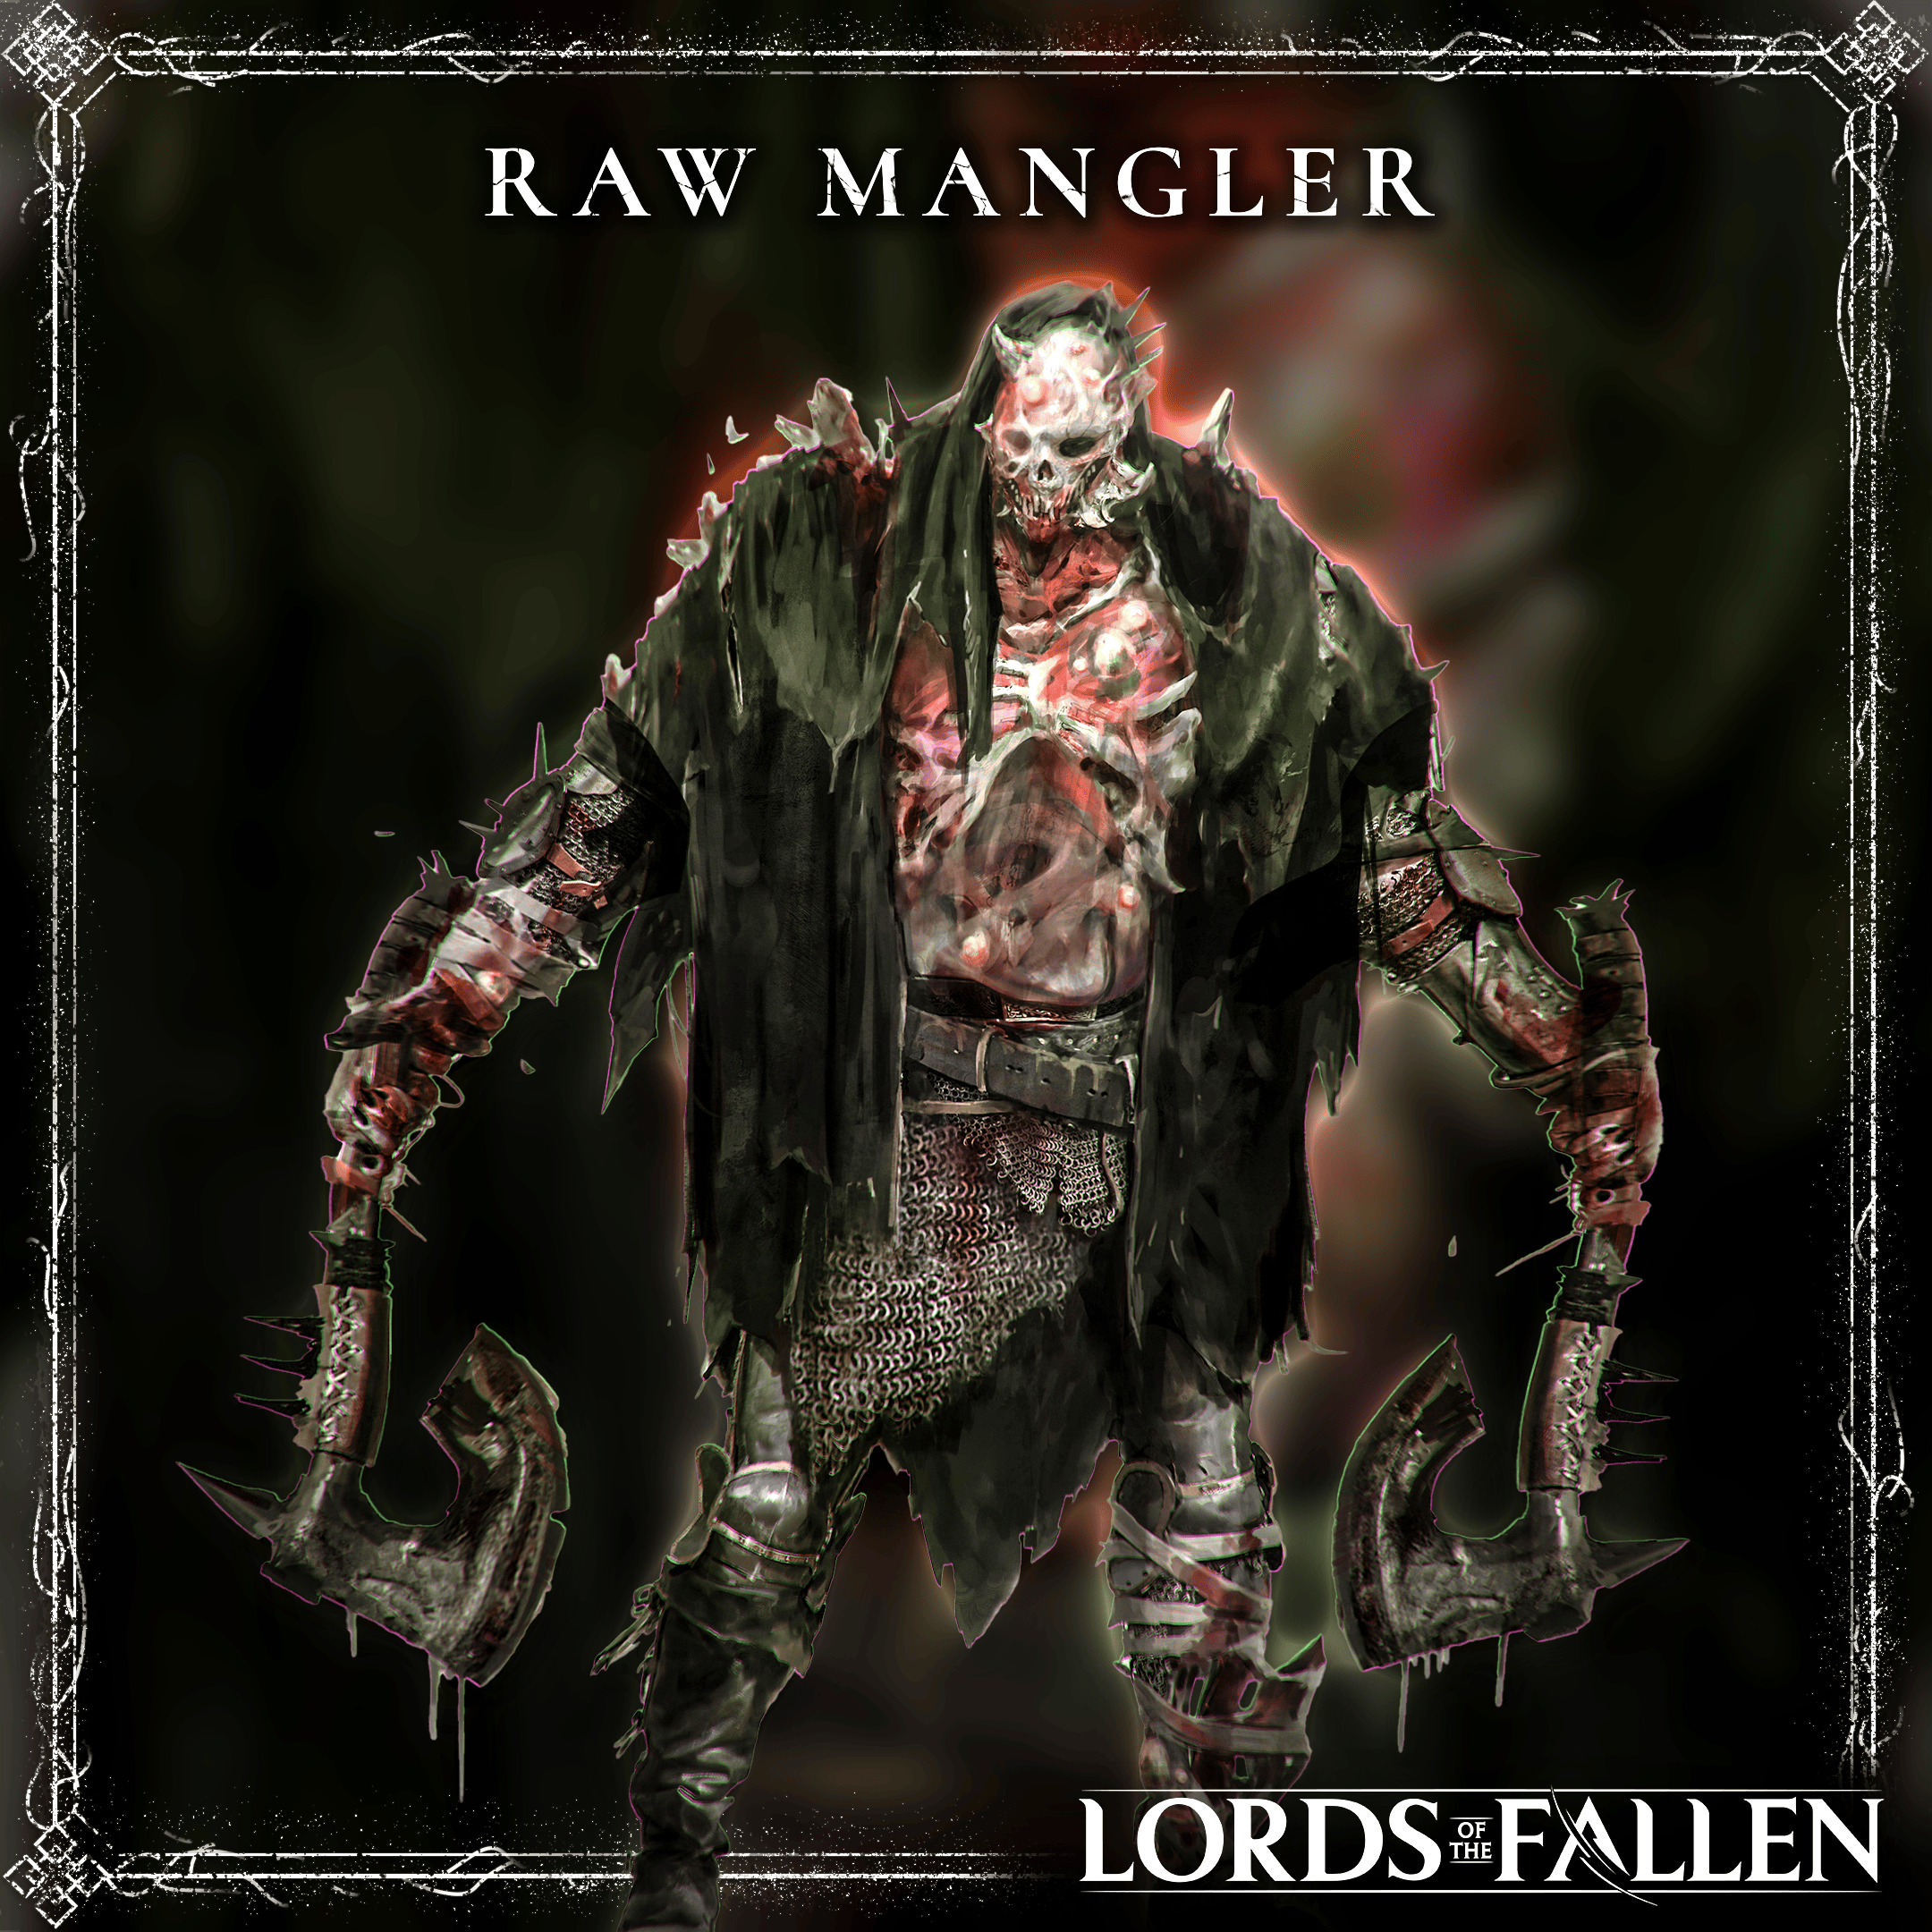 lords of the fallen raw mangler